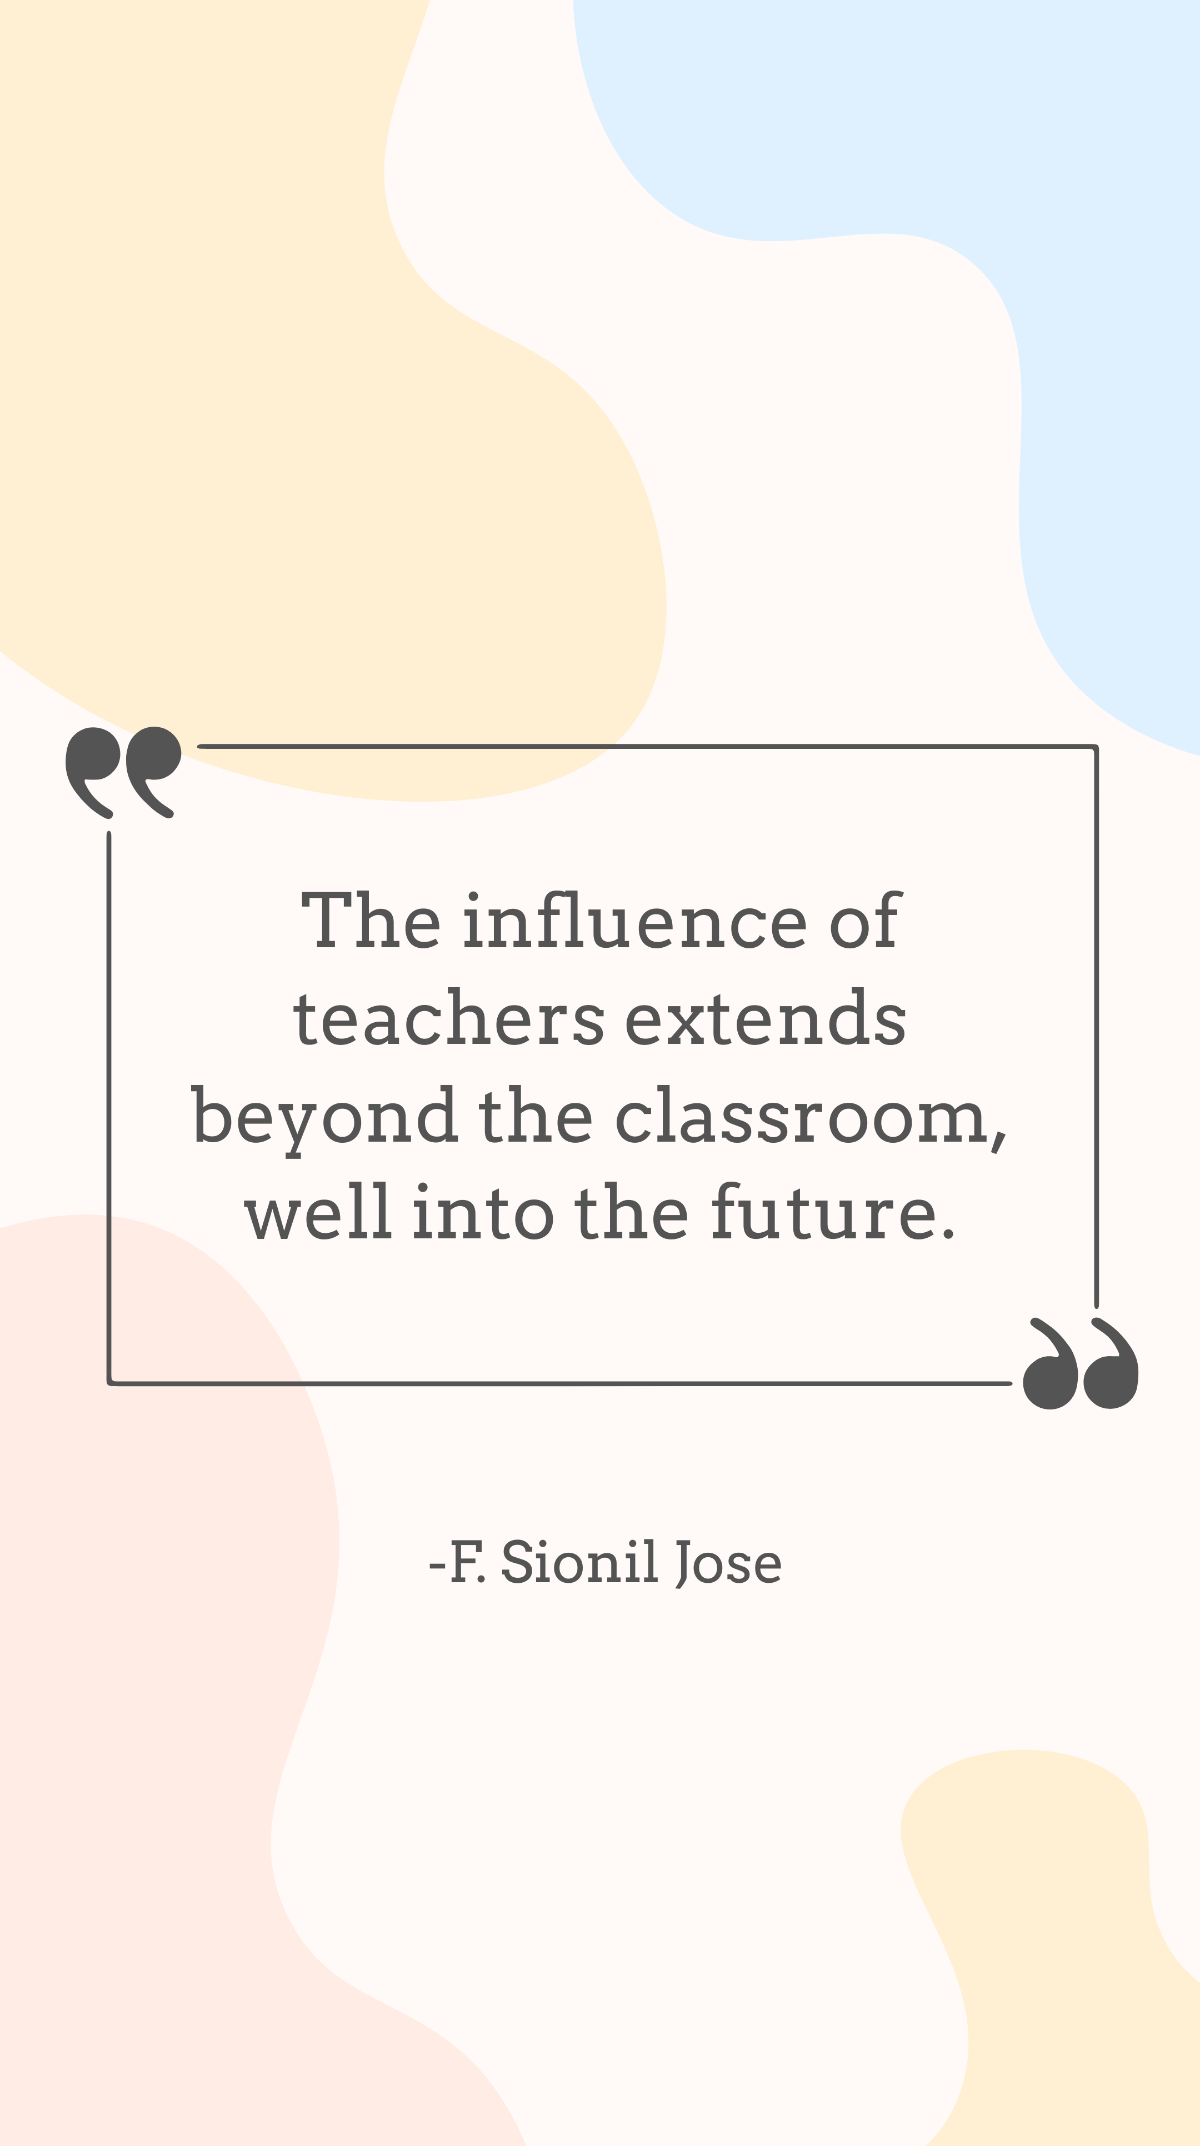 F. Sionil Jose - The influence of teachers extends beyond the classroom, well into the future.